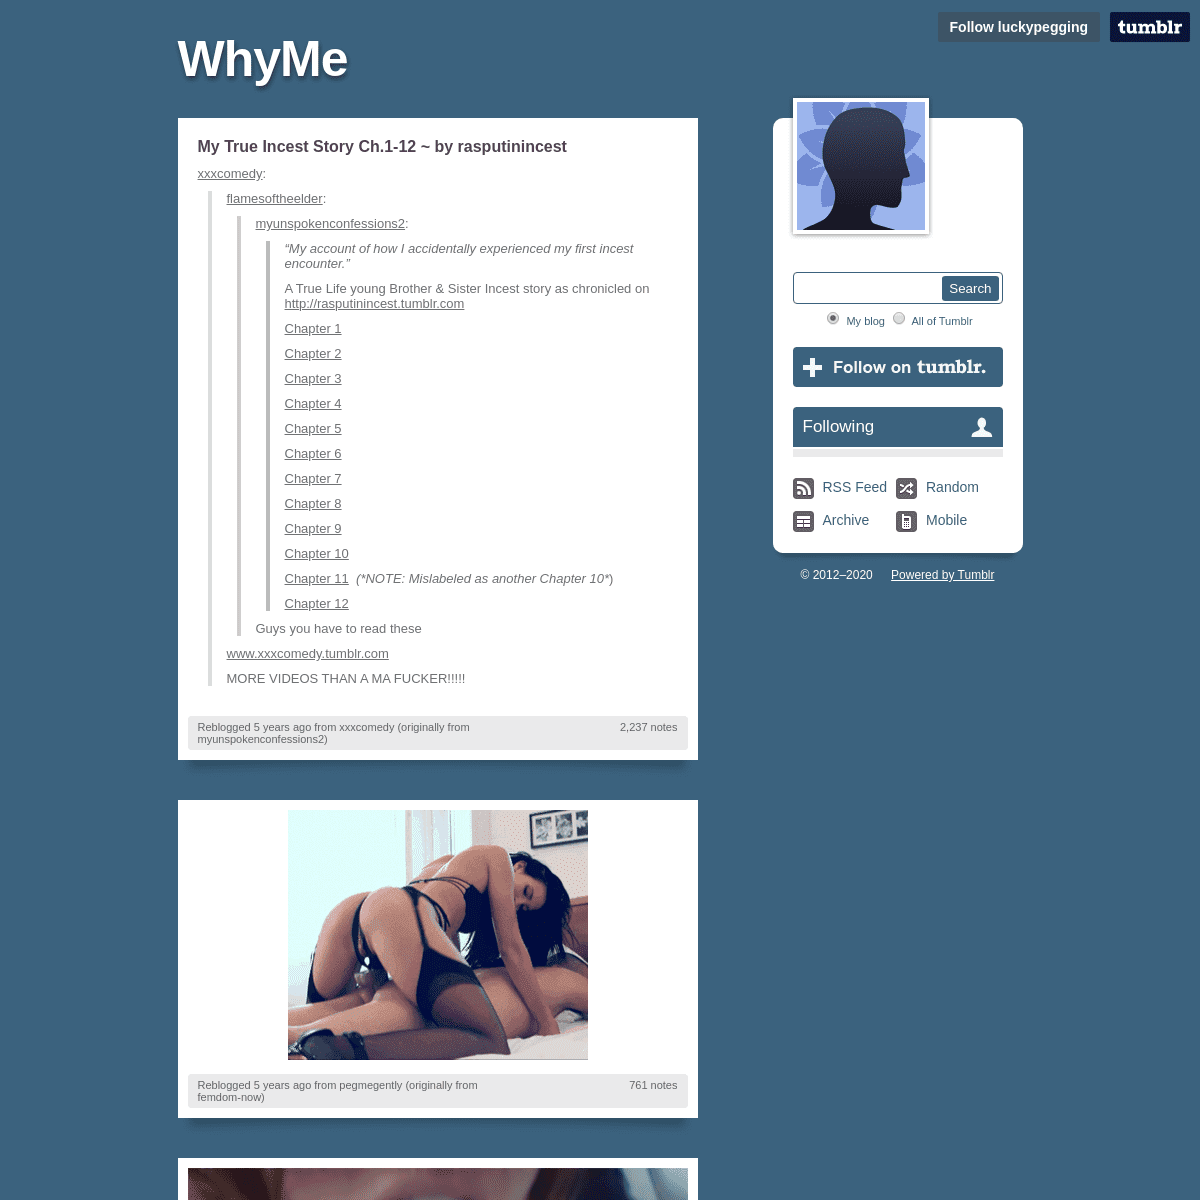 A complete backup of luckypegging.tumblr.com